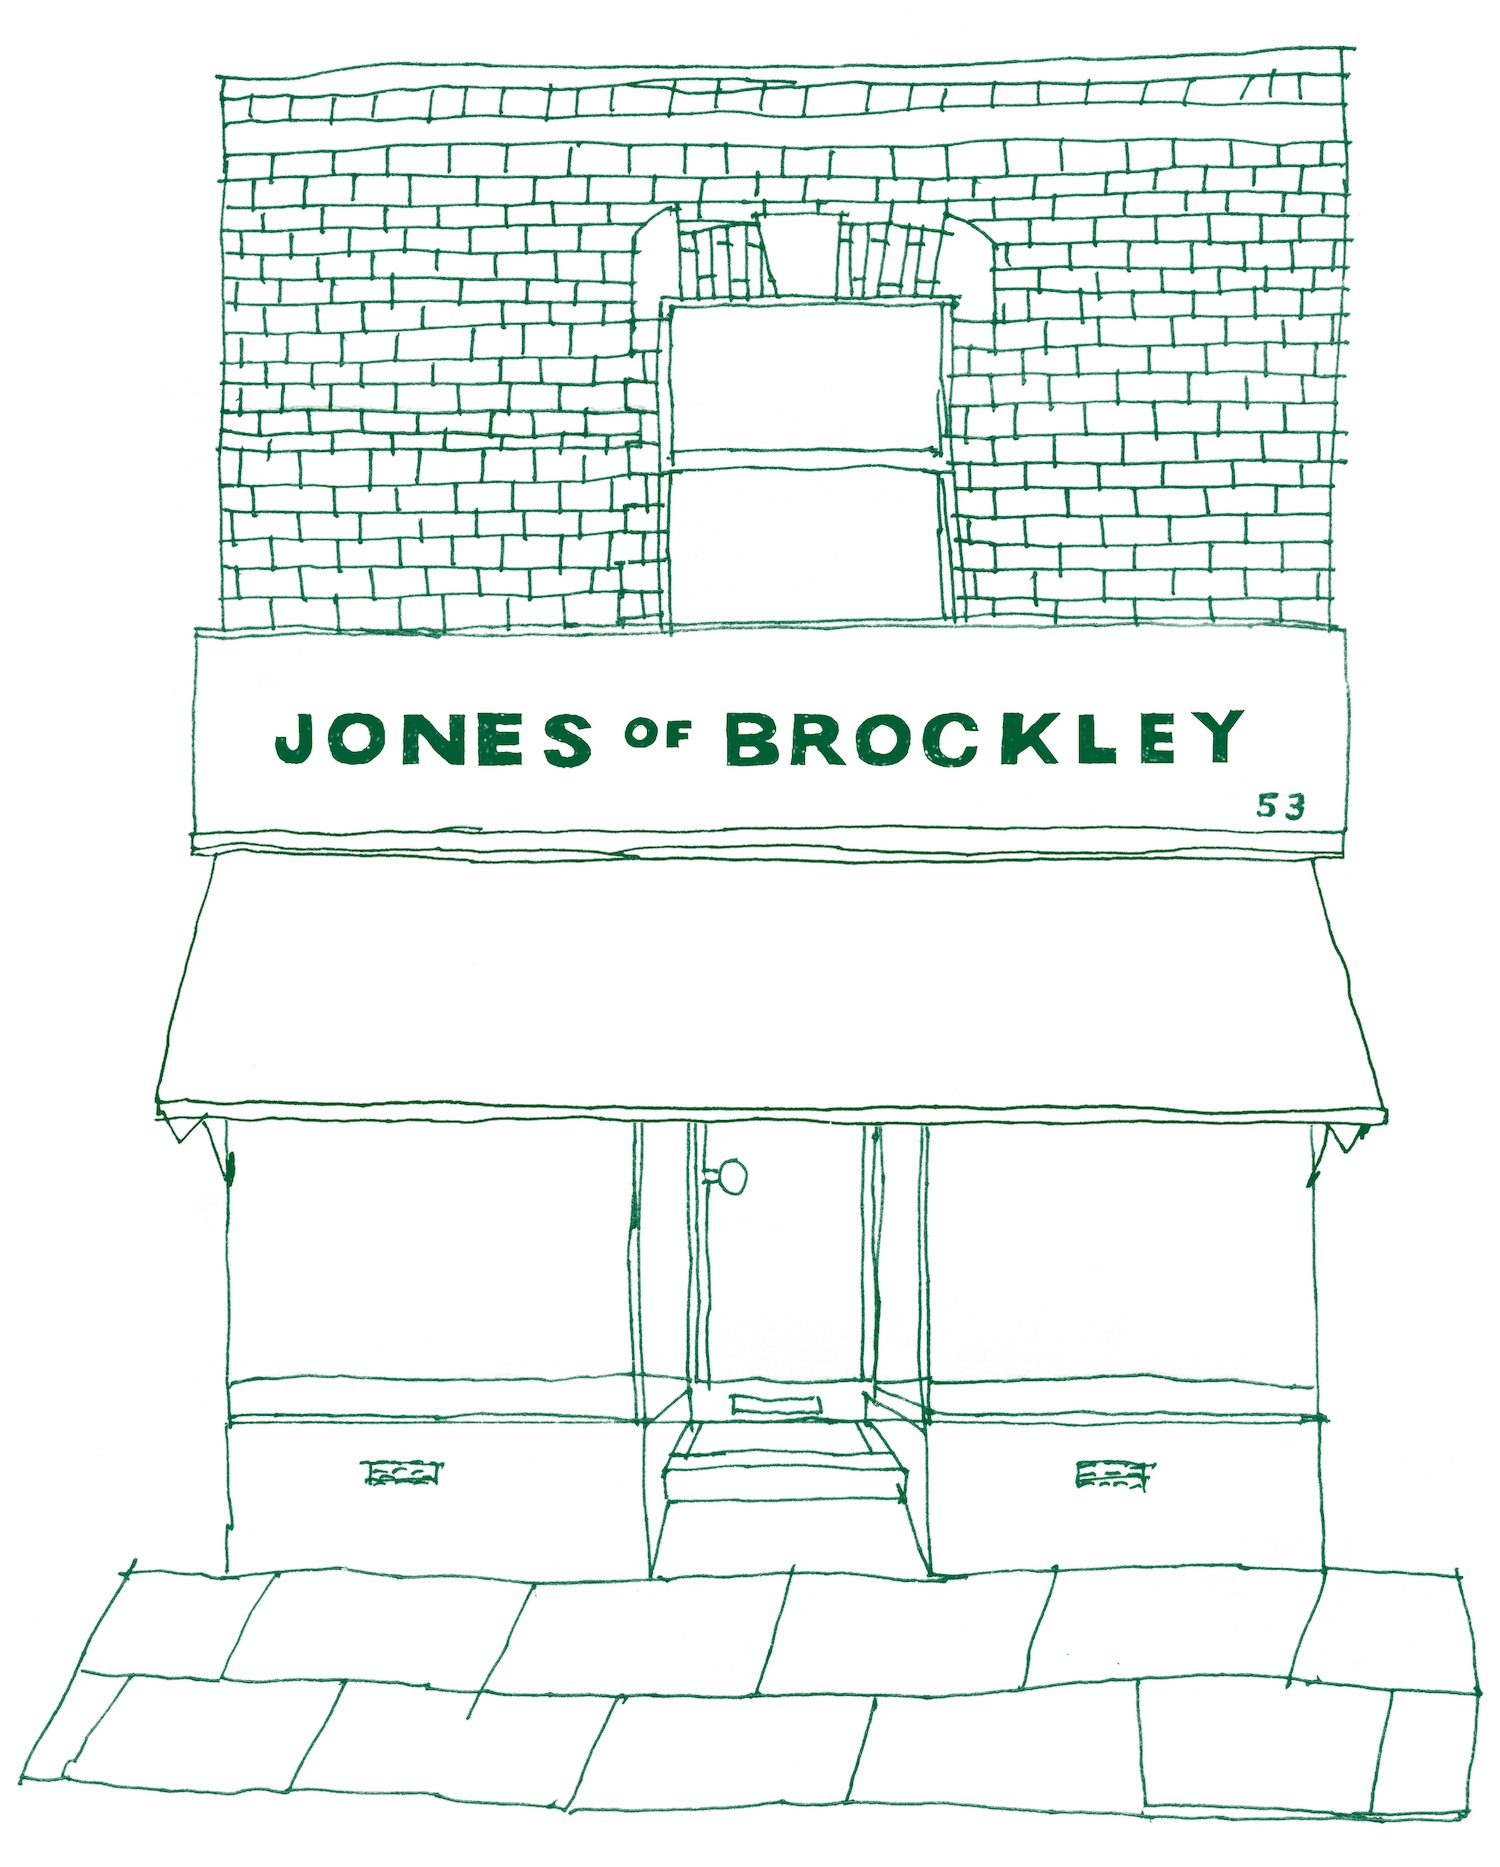 An illustration of the East Dulwich shopfront